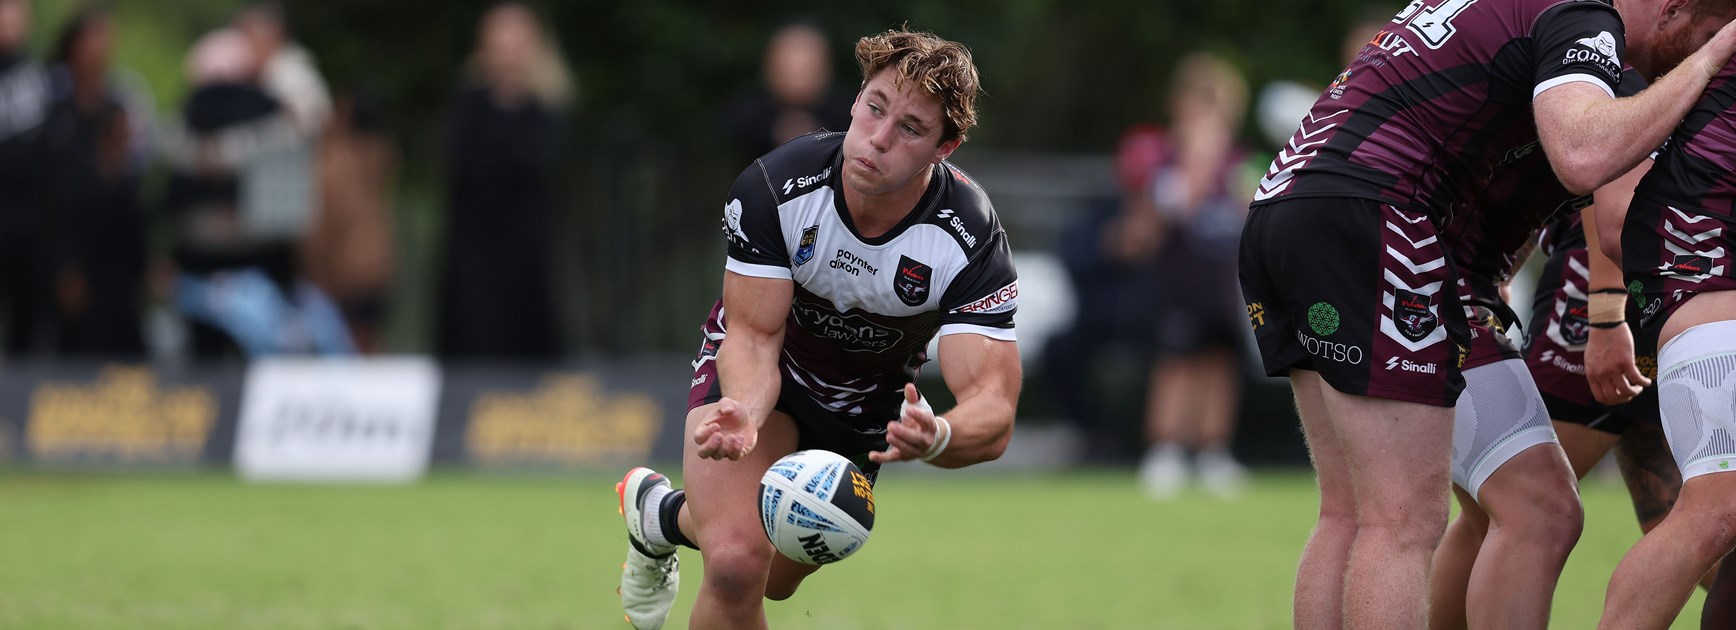 Blacktown back to winning ways in NSW Cup